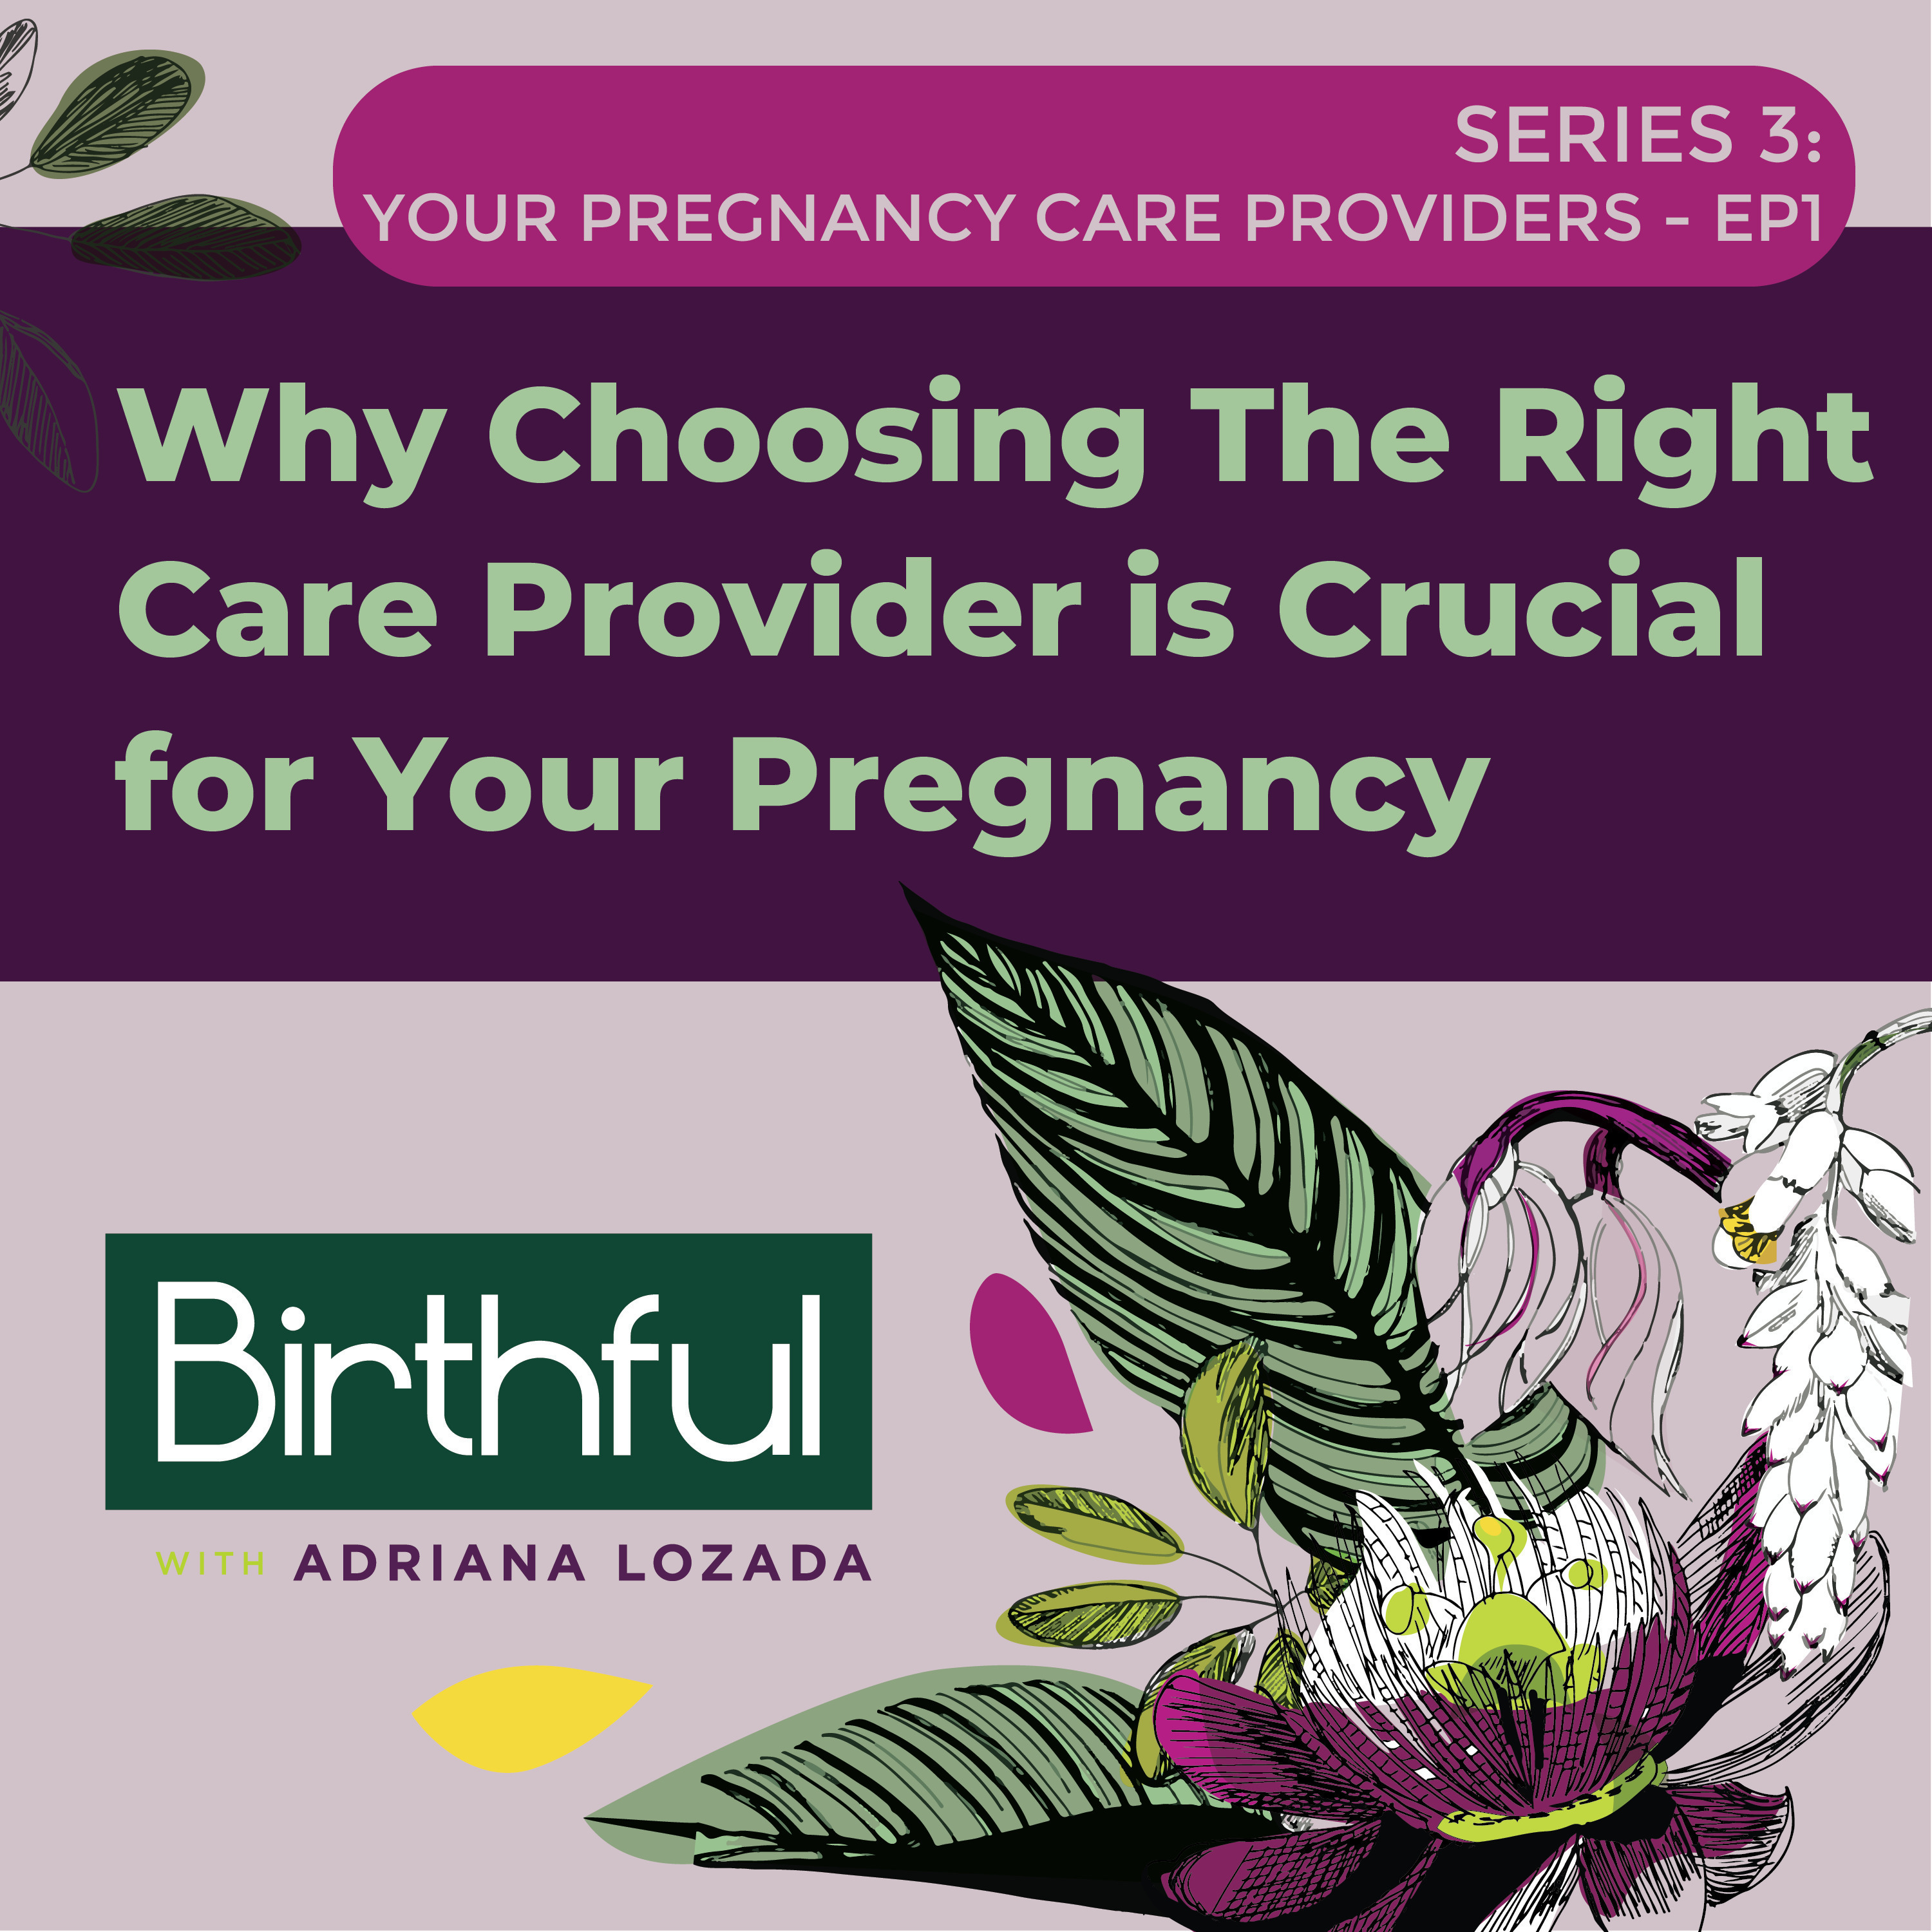 Why Choosing The Right Care Provider is Crucial for Your Pregnancy